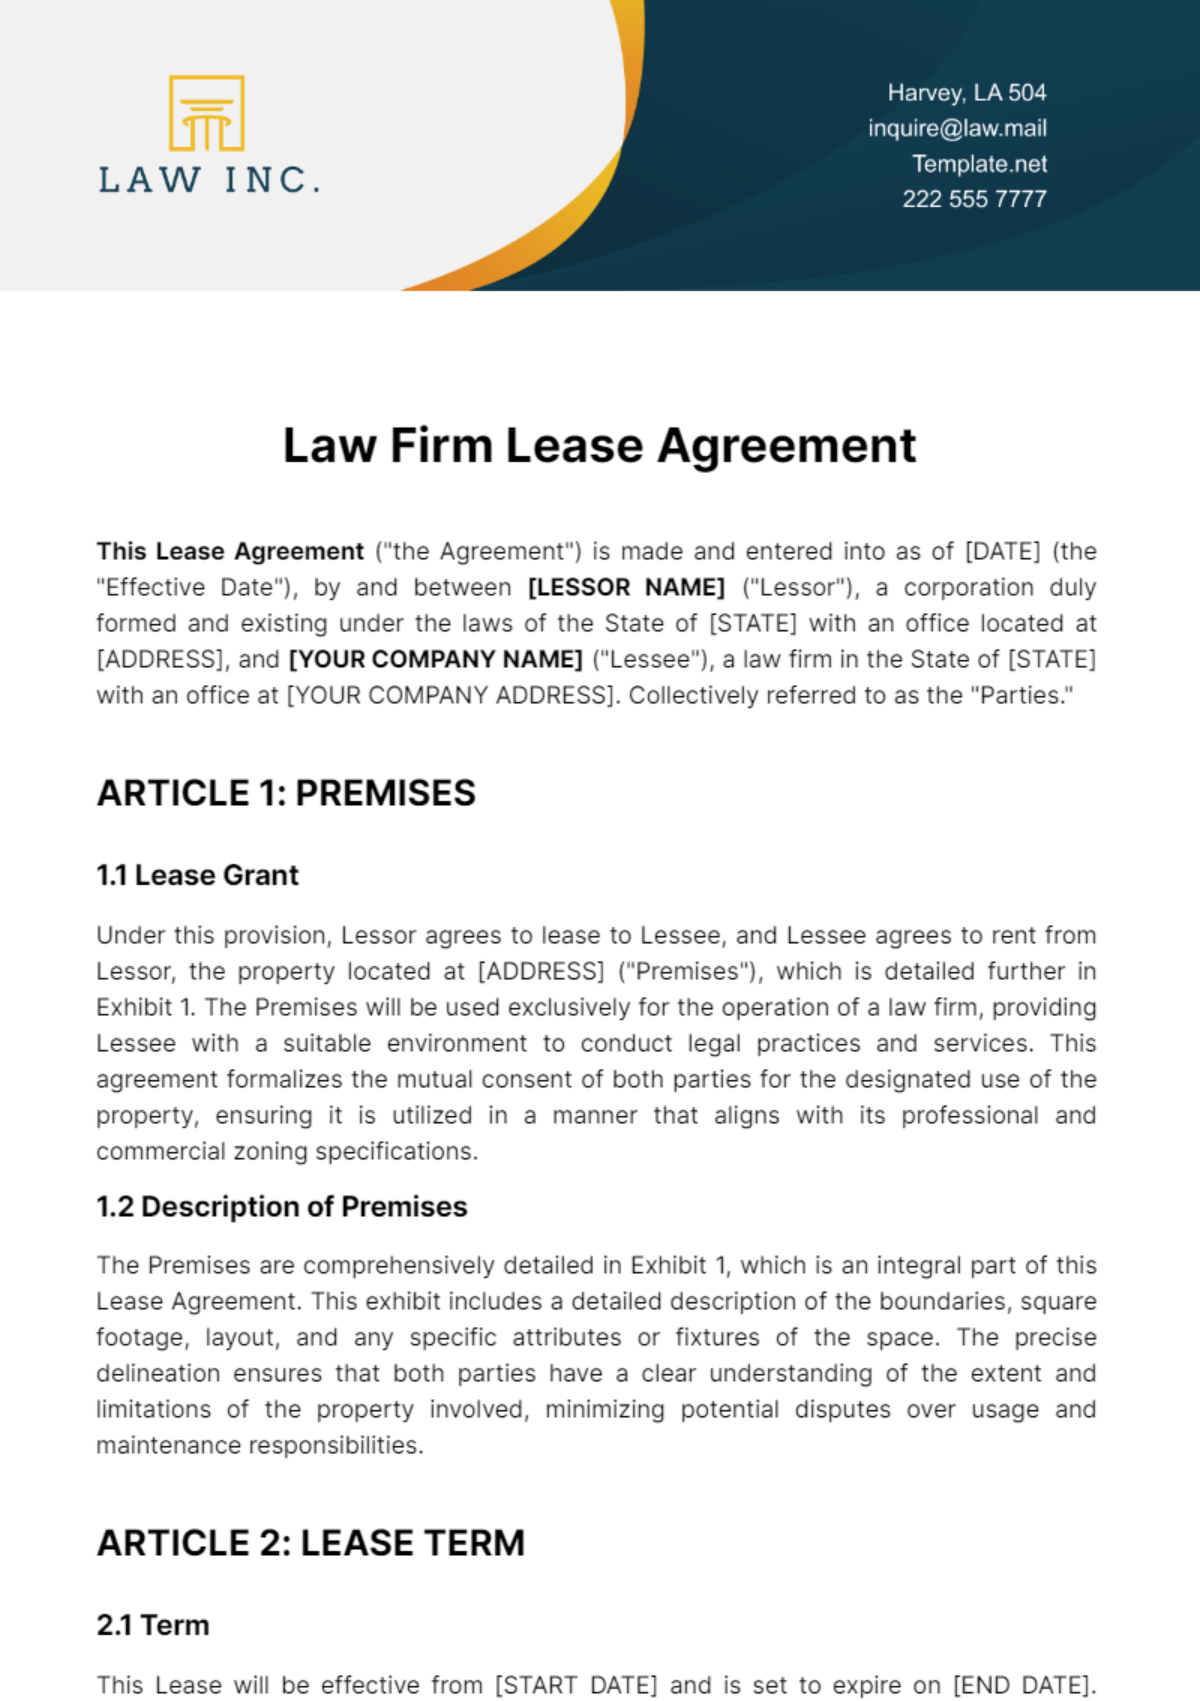 Law Firm Lease Agreement Template